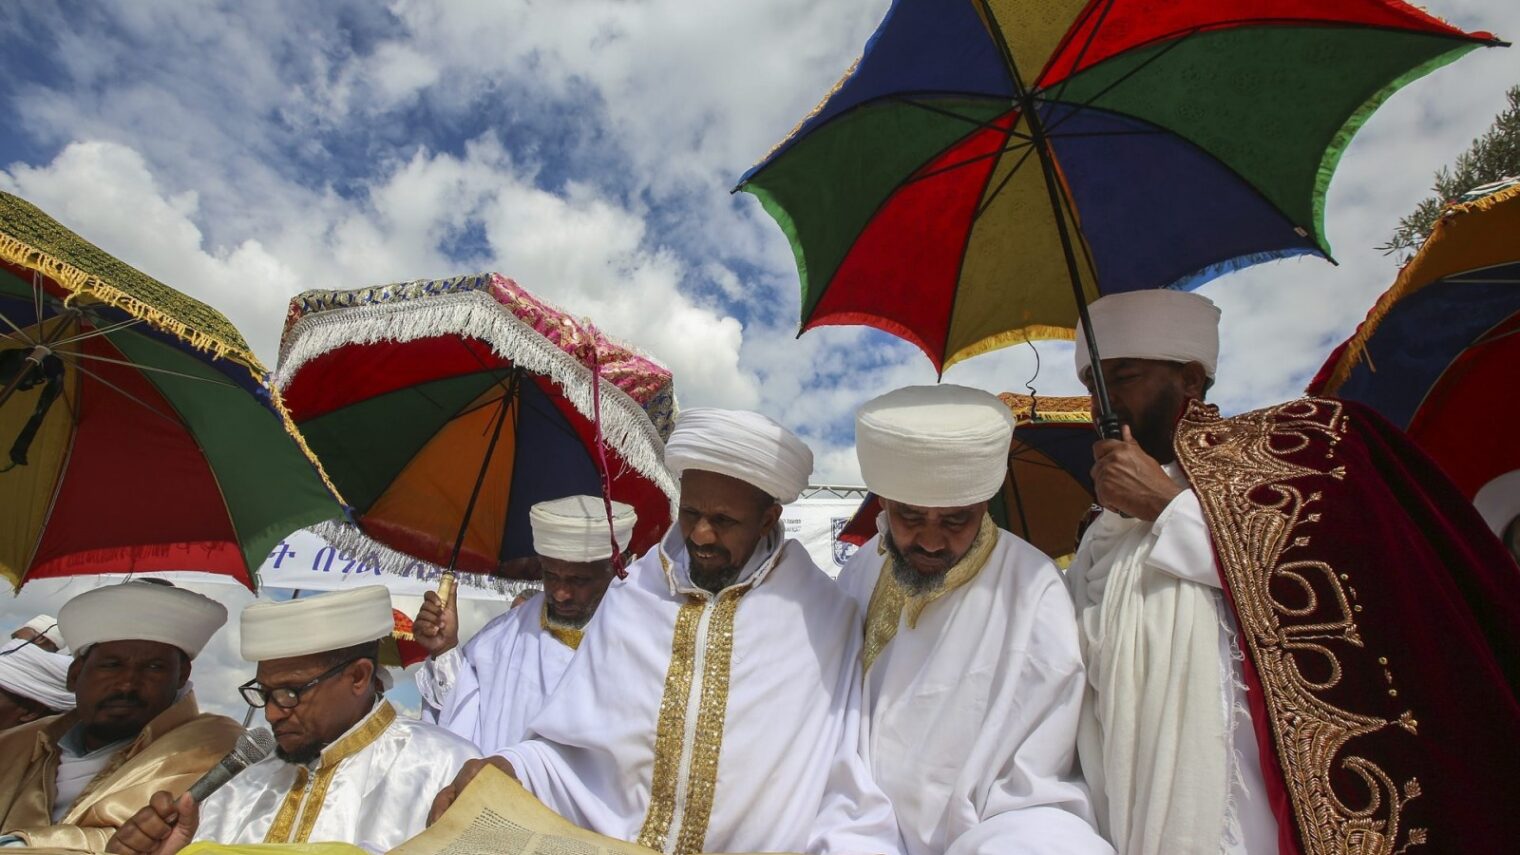 The Ethiopian holiday of Sigd. Photo by Flash90